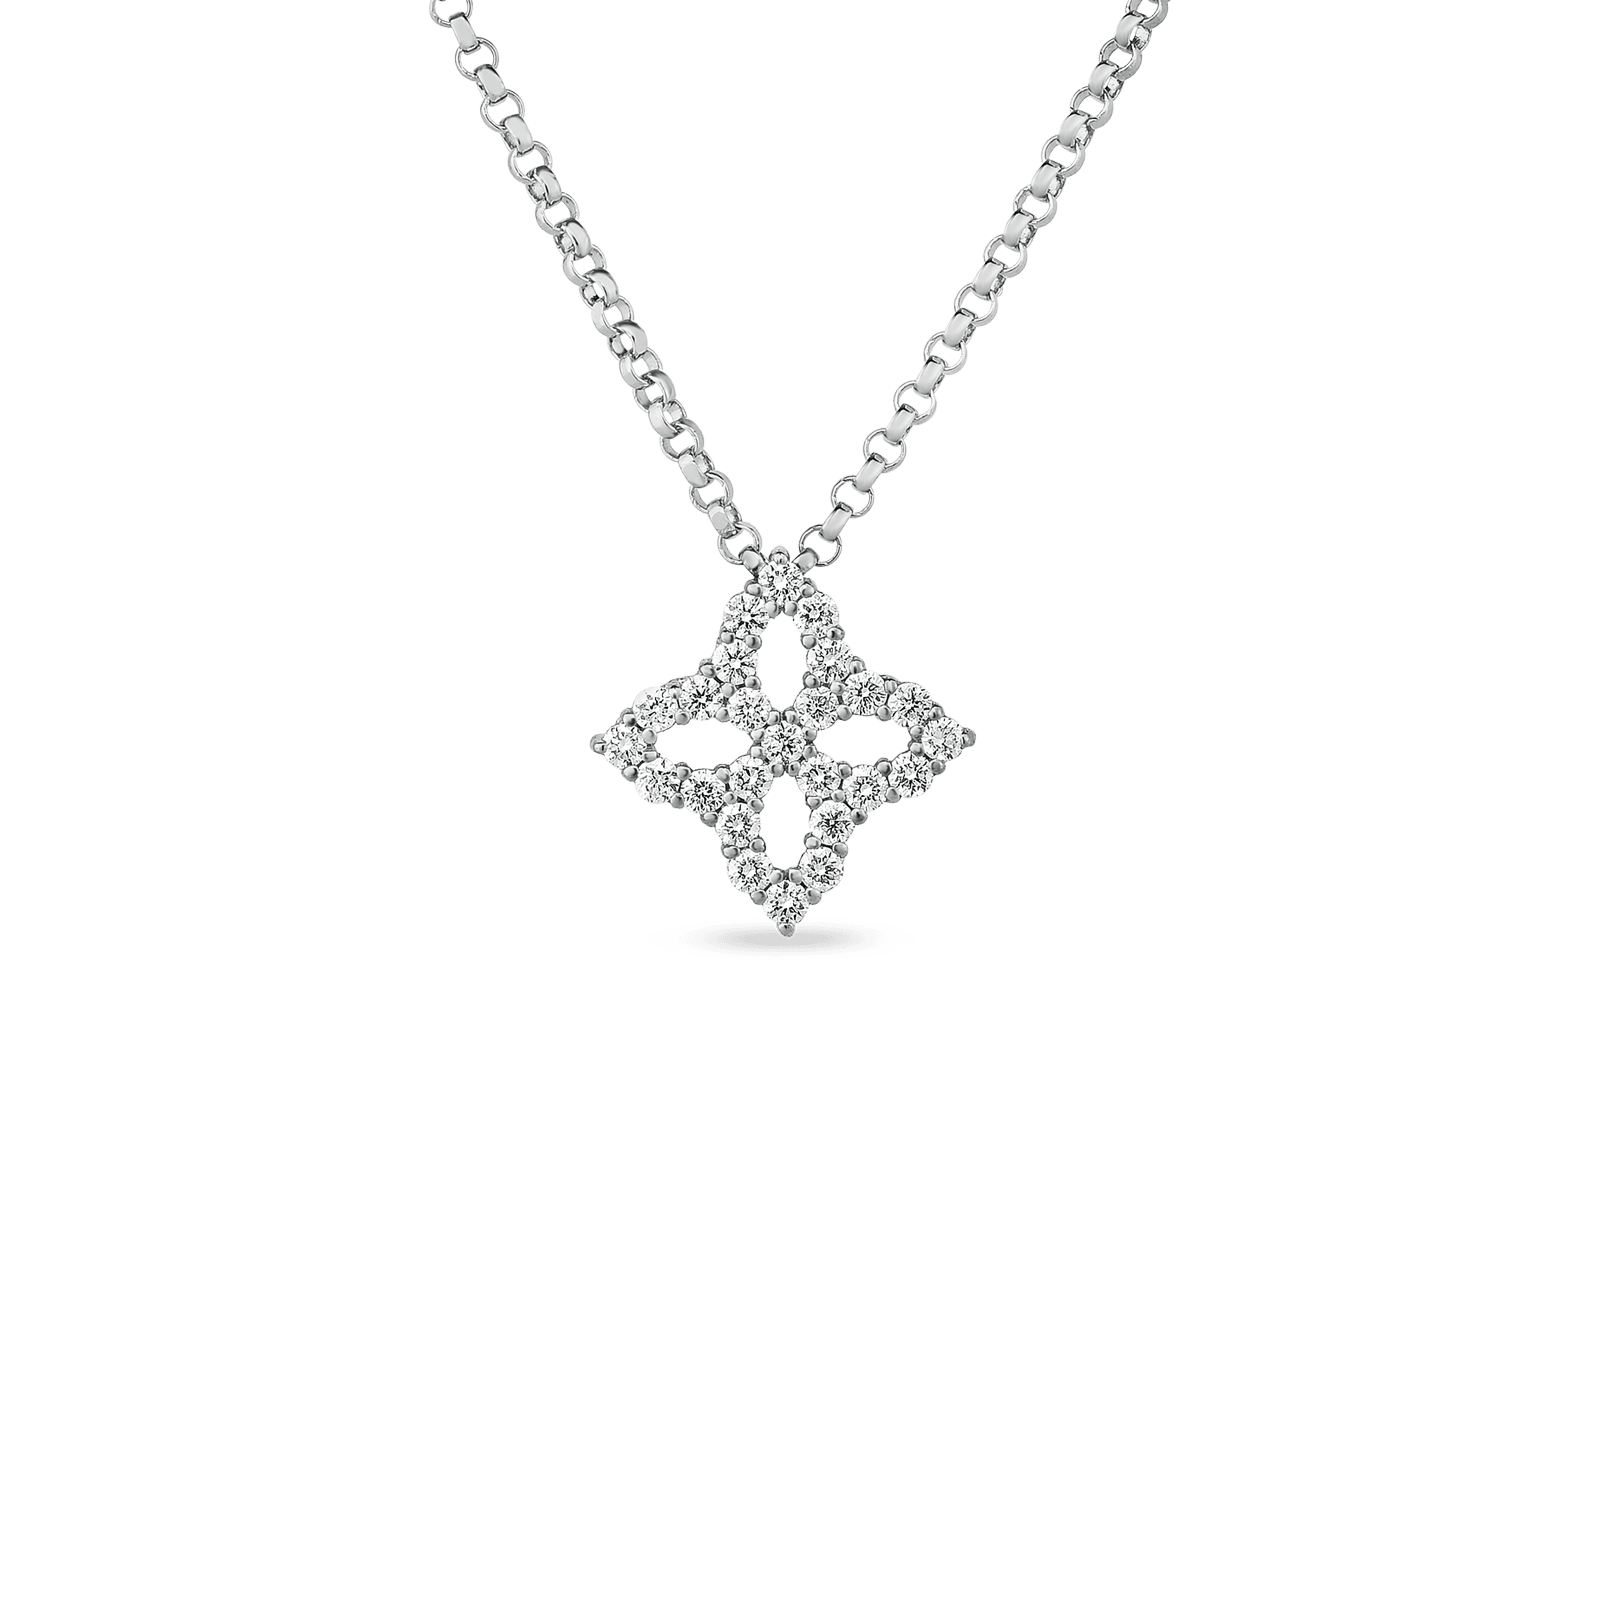 White Gold Necklace with Small Diamond Pendant